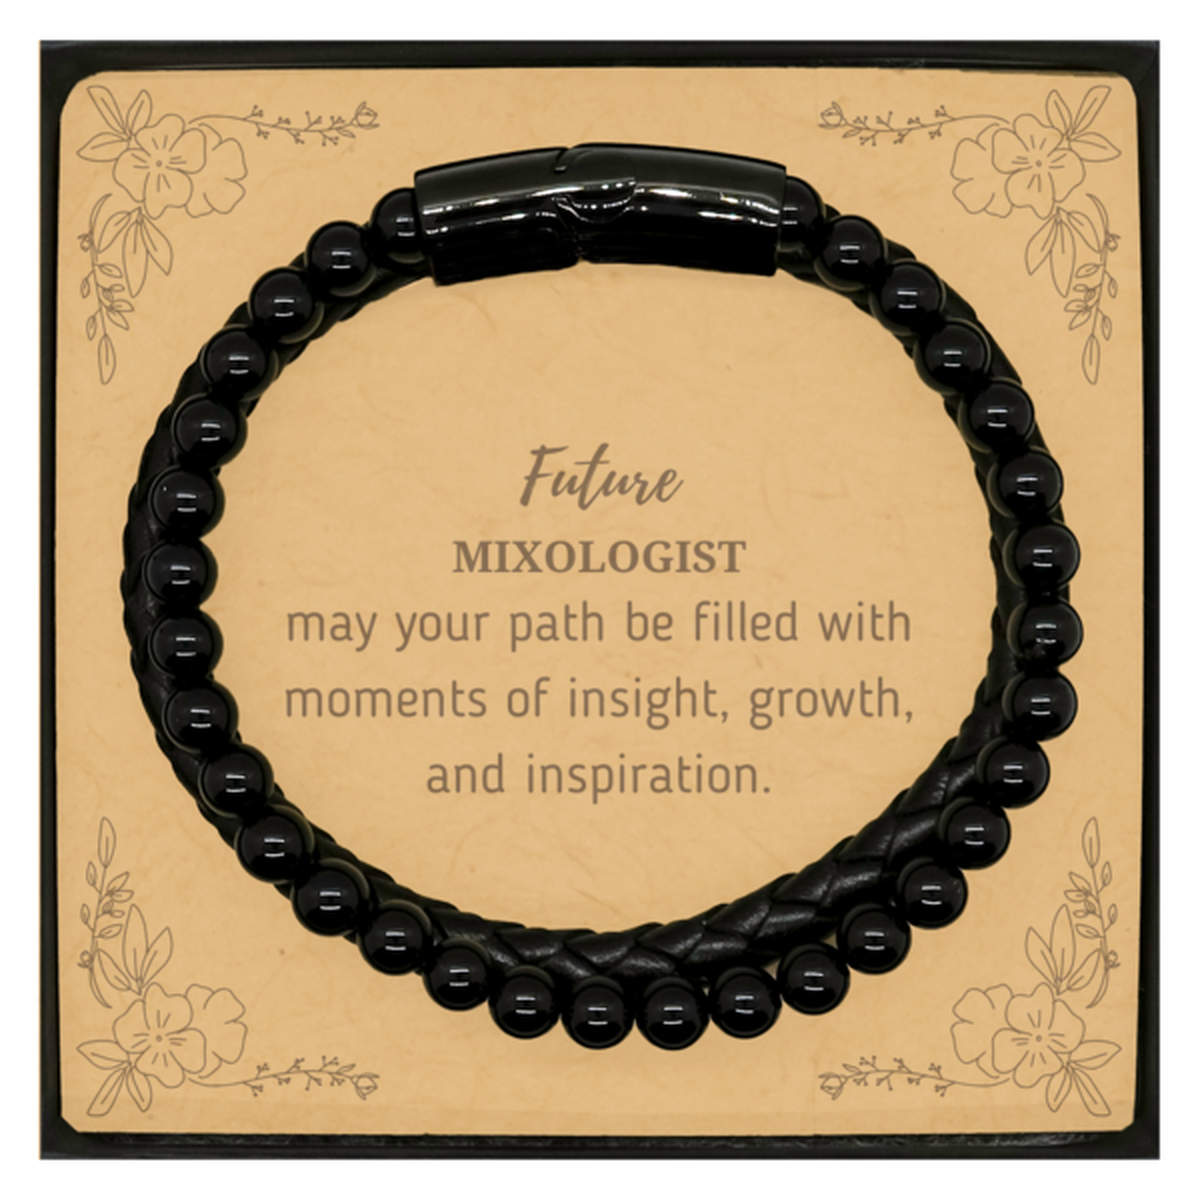 Future Mixologist Gifts, May your path be filled with moments of insight, Graduation Gifts for New Mixologist, Christmas Unique Stone Leather Bracelets For Men, Women, Friends